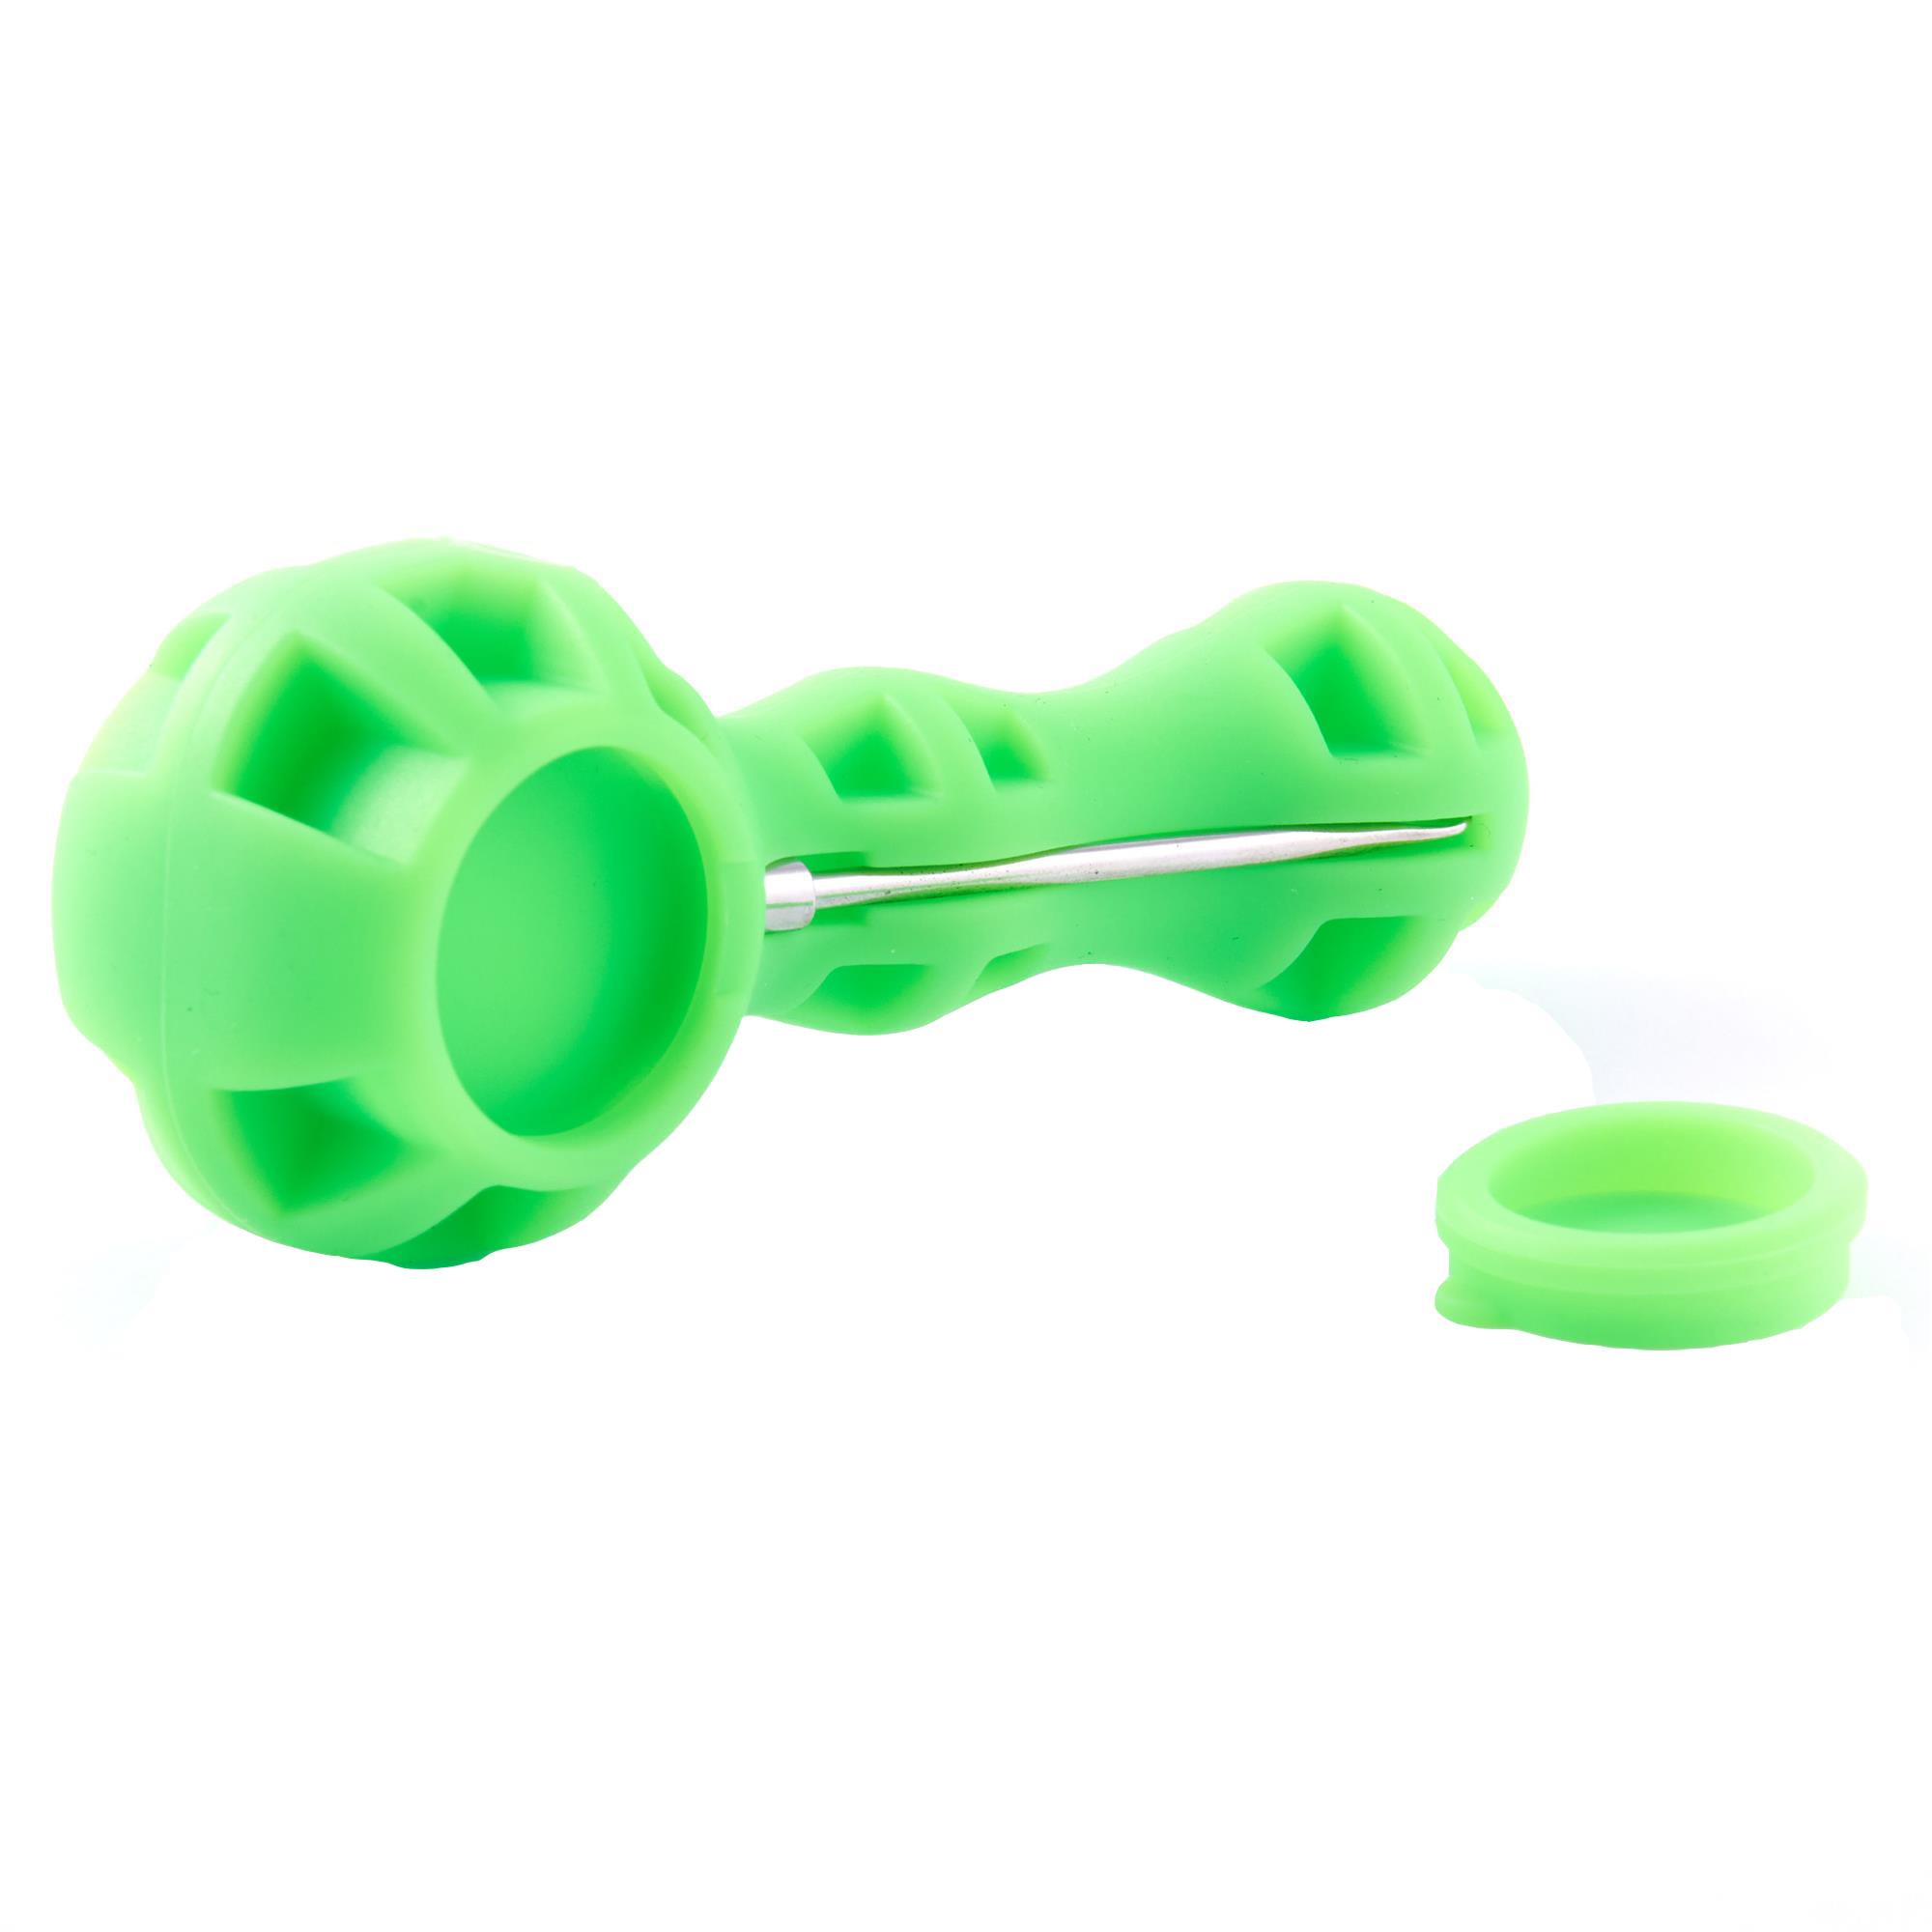 RUGGED SILICONE PIPE